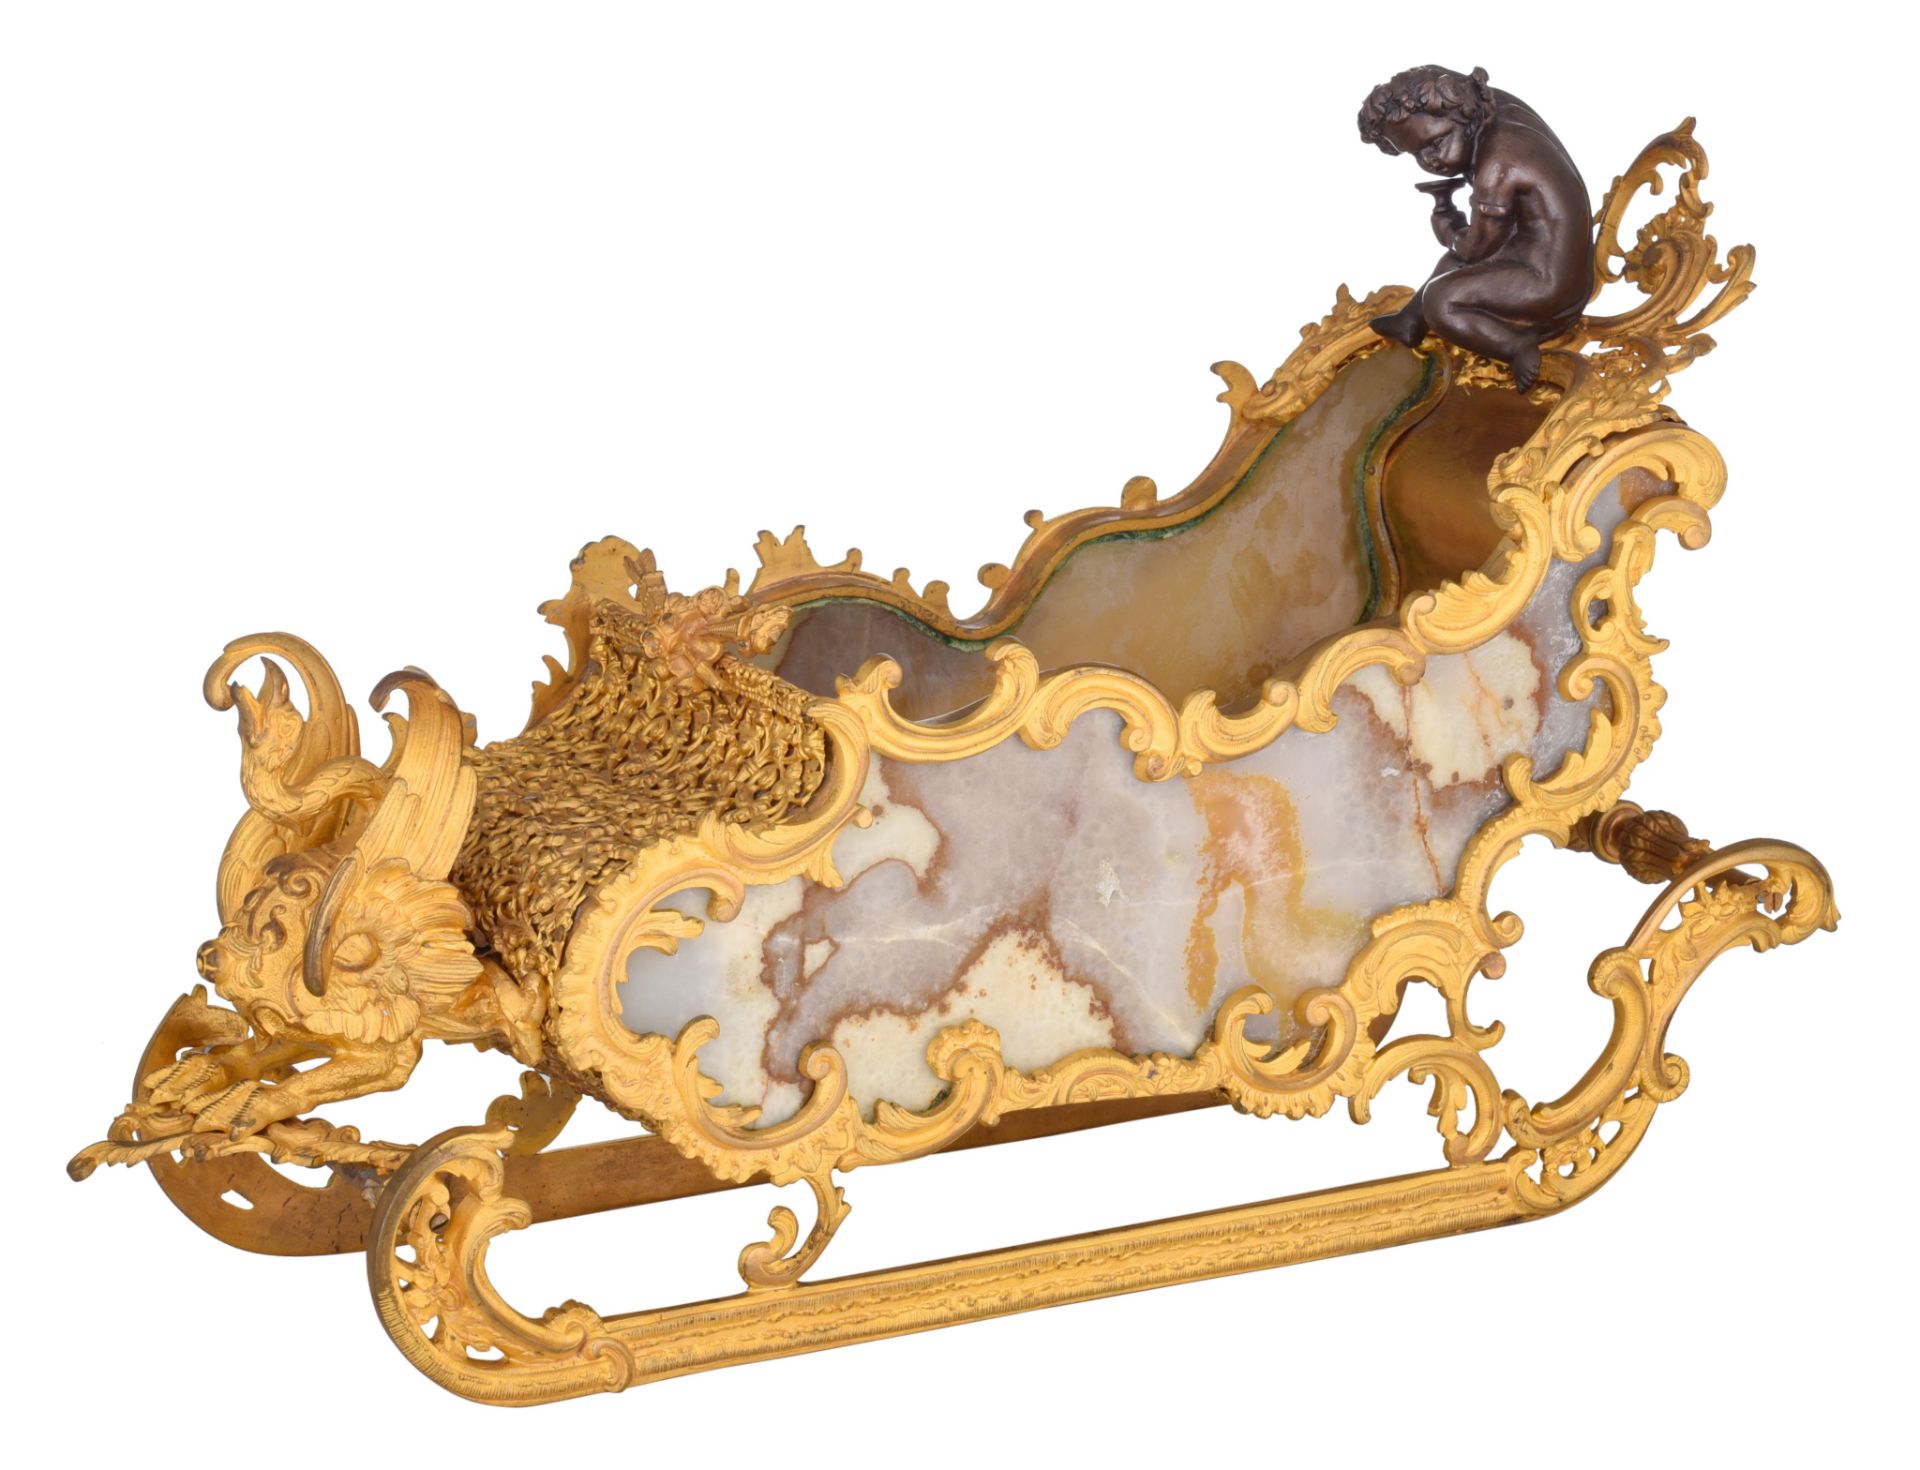 A fine gilt and patinated bronze Russian Rococo style miniature sledge, with onyx plaques, H 31 - W